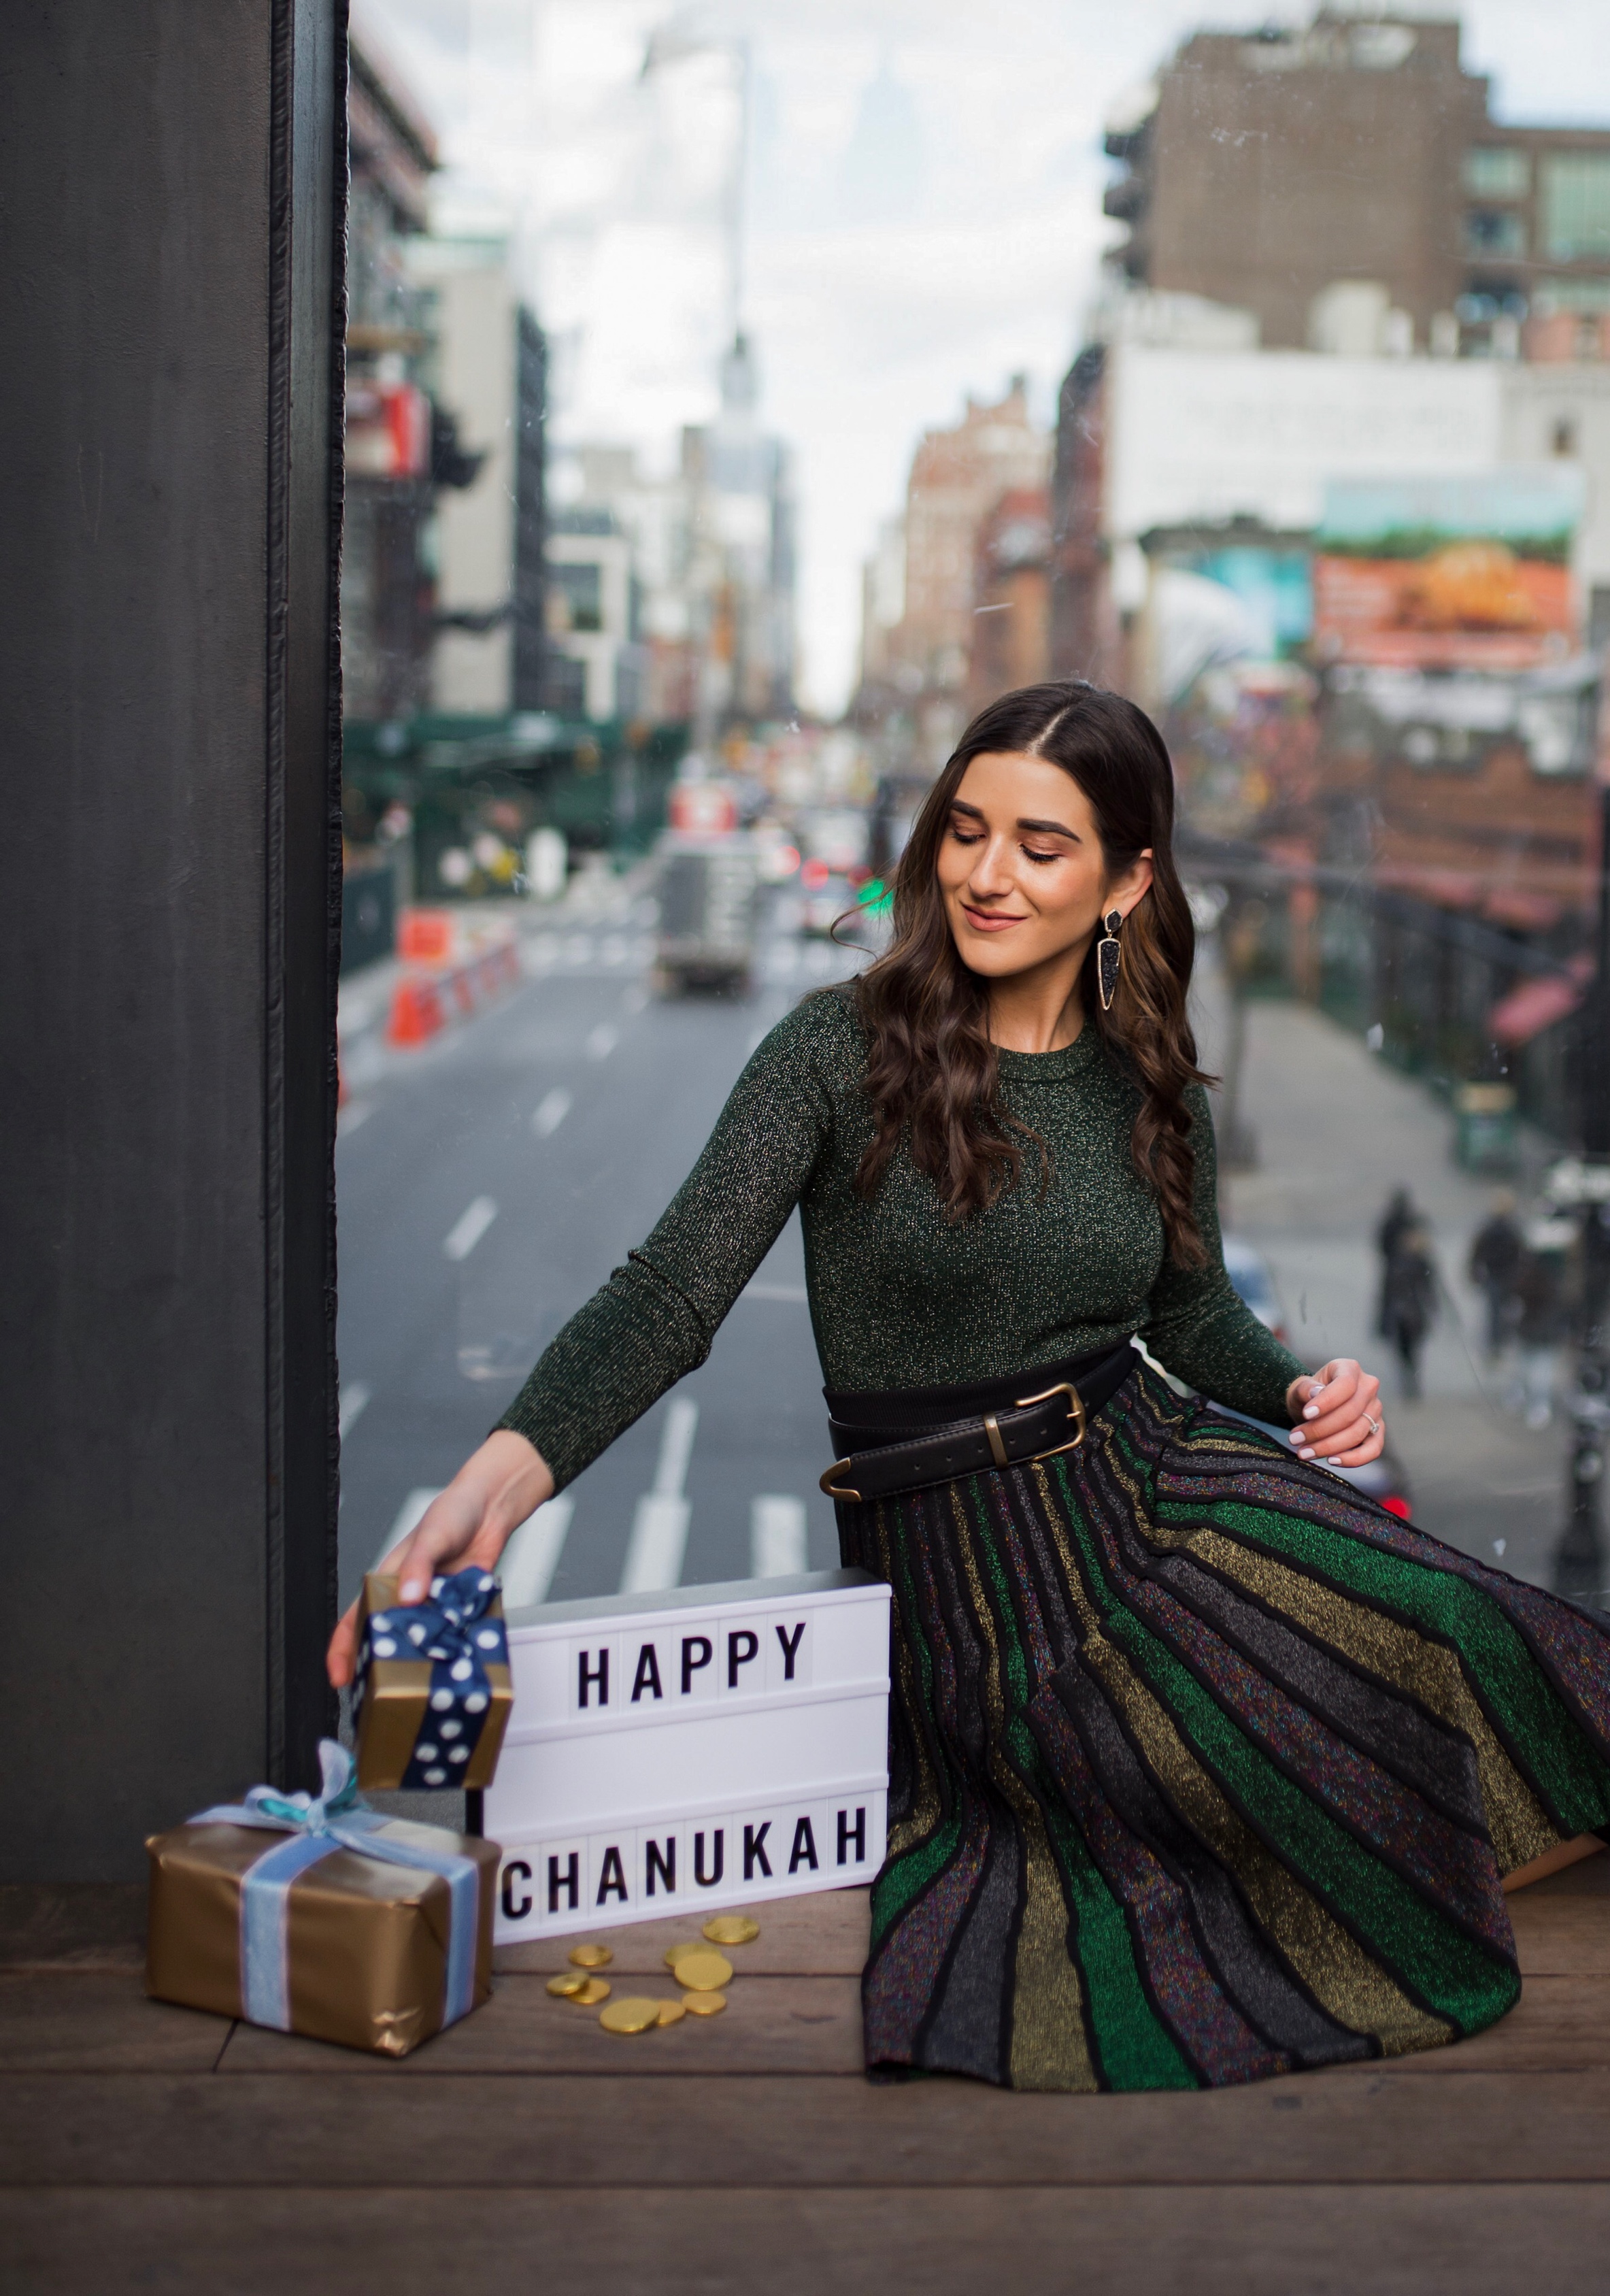 So You Wanna Talk About Diversity Don't forget me Esther Santer Fashion Blog NYC Street Style Blogger Outfit OOTD Trendy Shopping Miri Couture Laurel Creative Sparkles Glitter Holiday Midi Skirt Jewish Chanukah Green Long Sleeve Top Glitter Shirt 2018.jpg